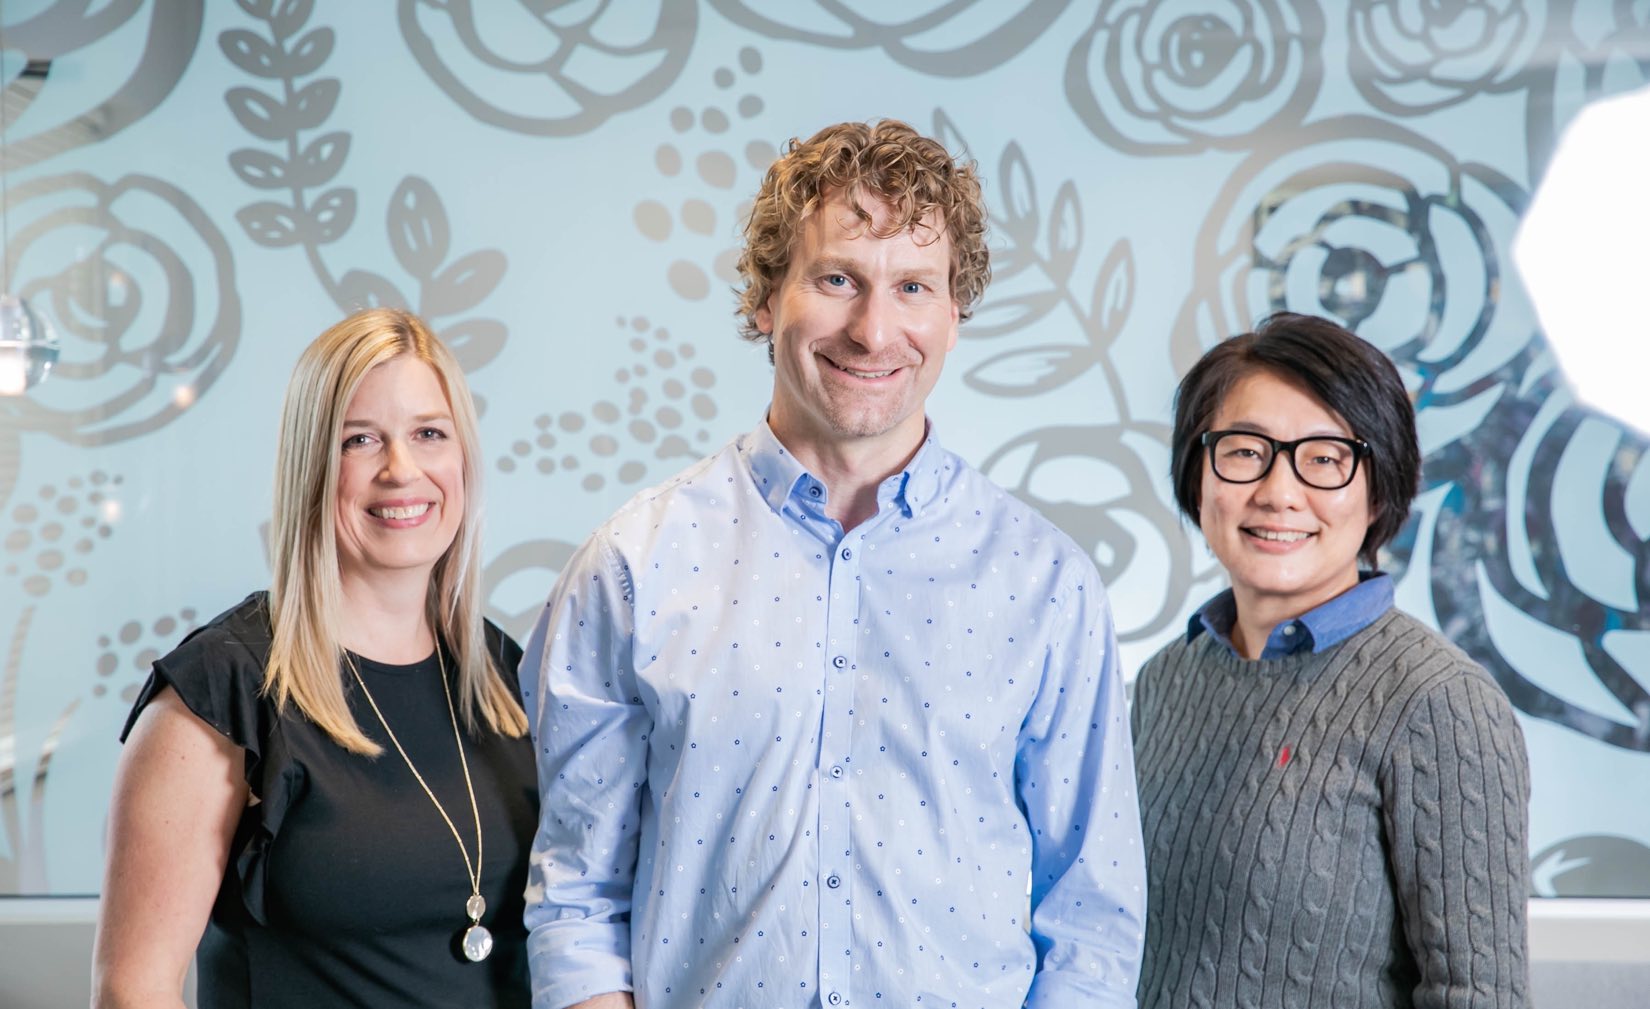 Rosemary Heights Dentists Dr. Heather Barnes, Dr. Patrick Gowdy and Dr. Fanny Chu are ready to provide dental service in South Surrey